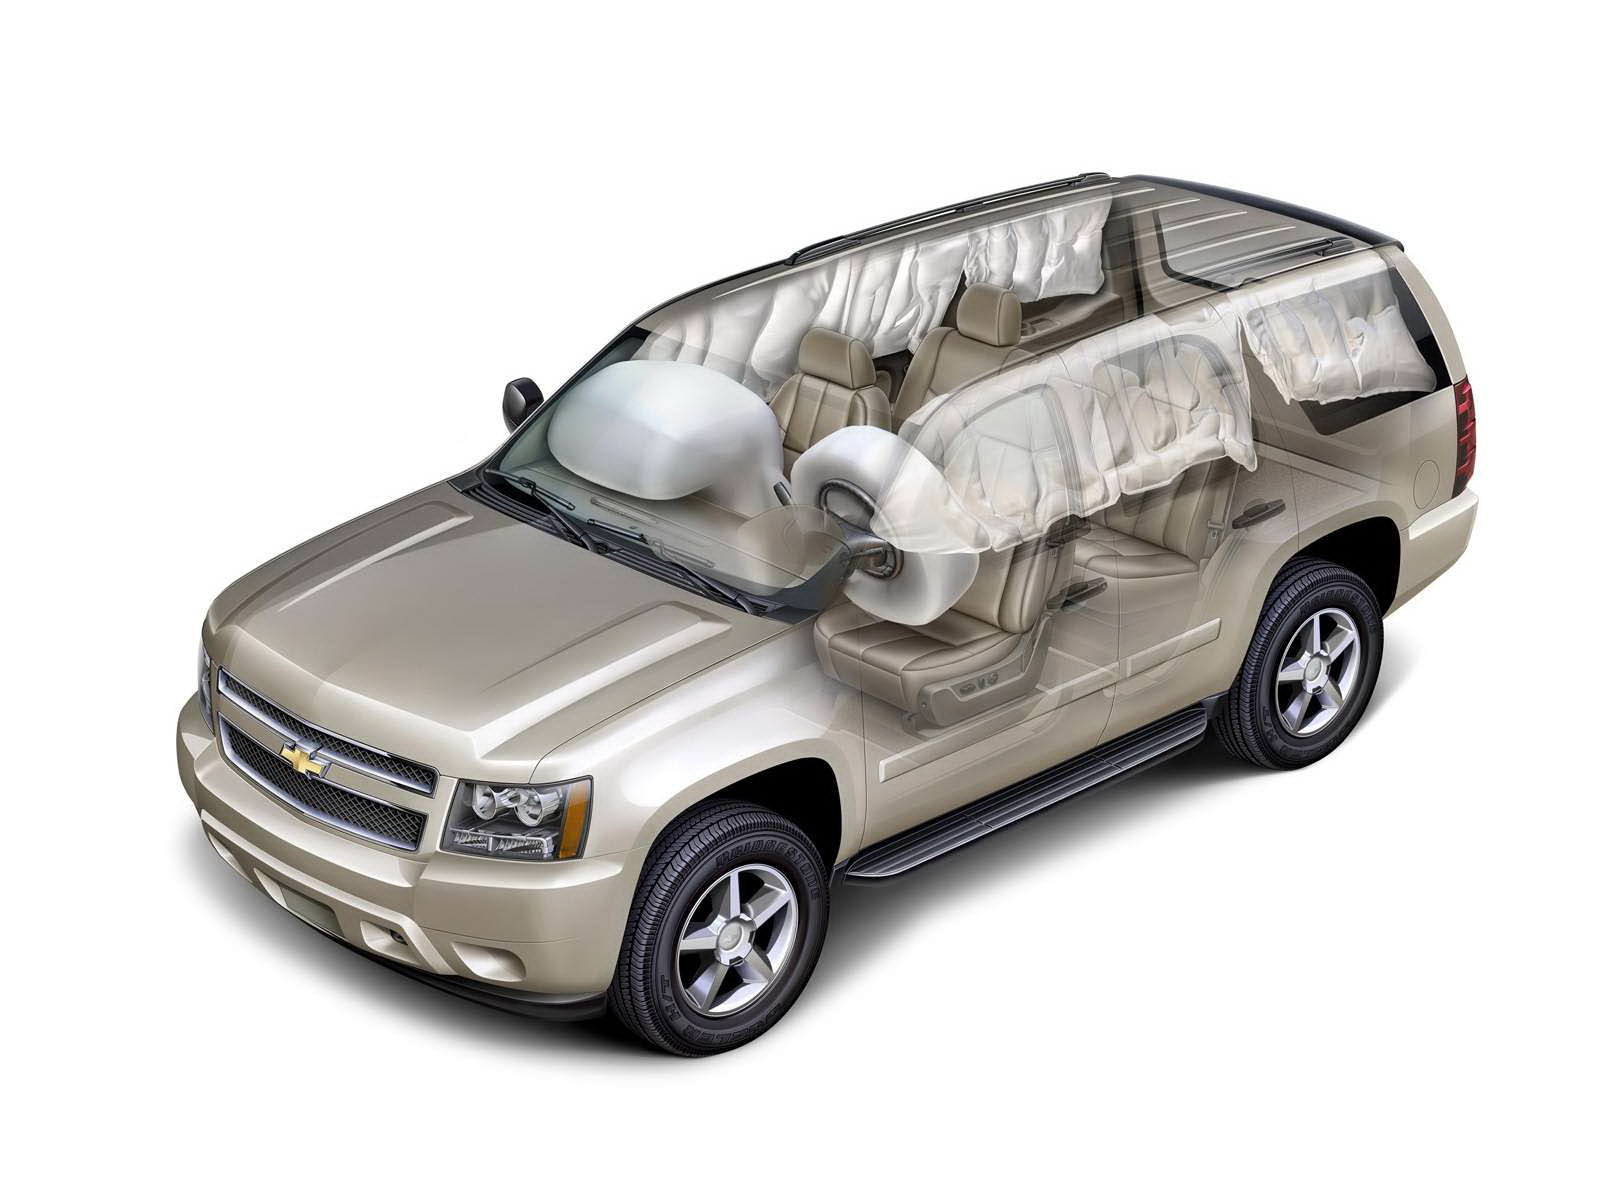 2013 Chevrolet Tahoe Body Structure and Airbags - Boron Extrication